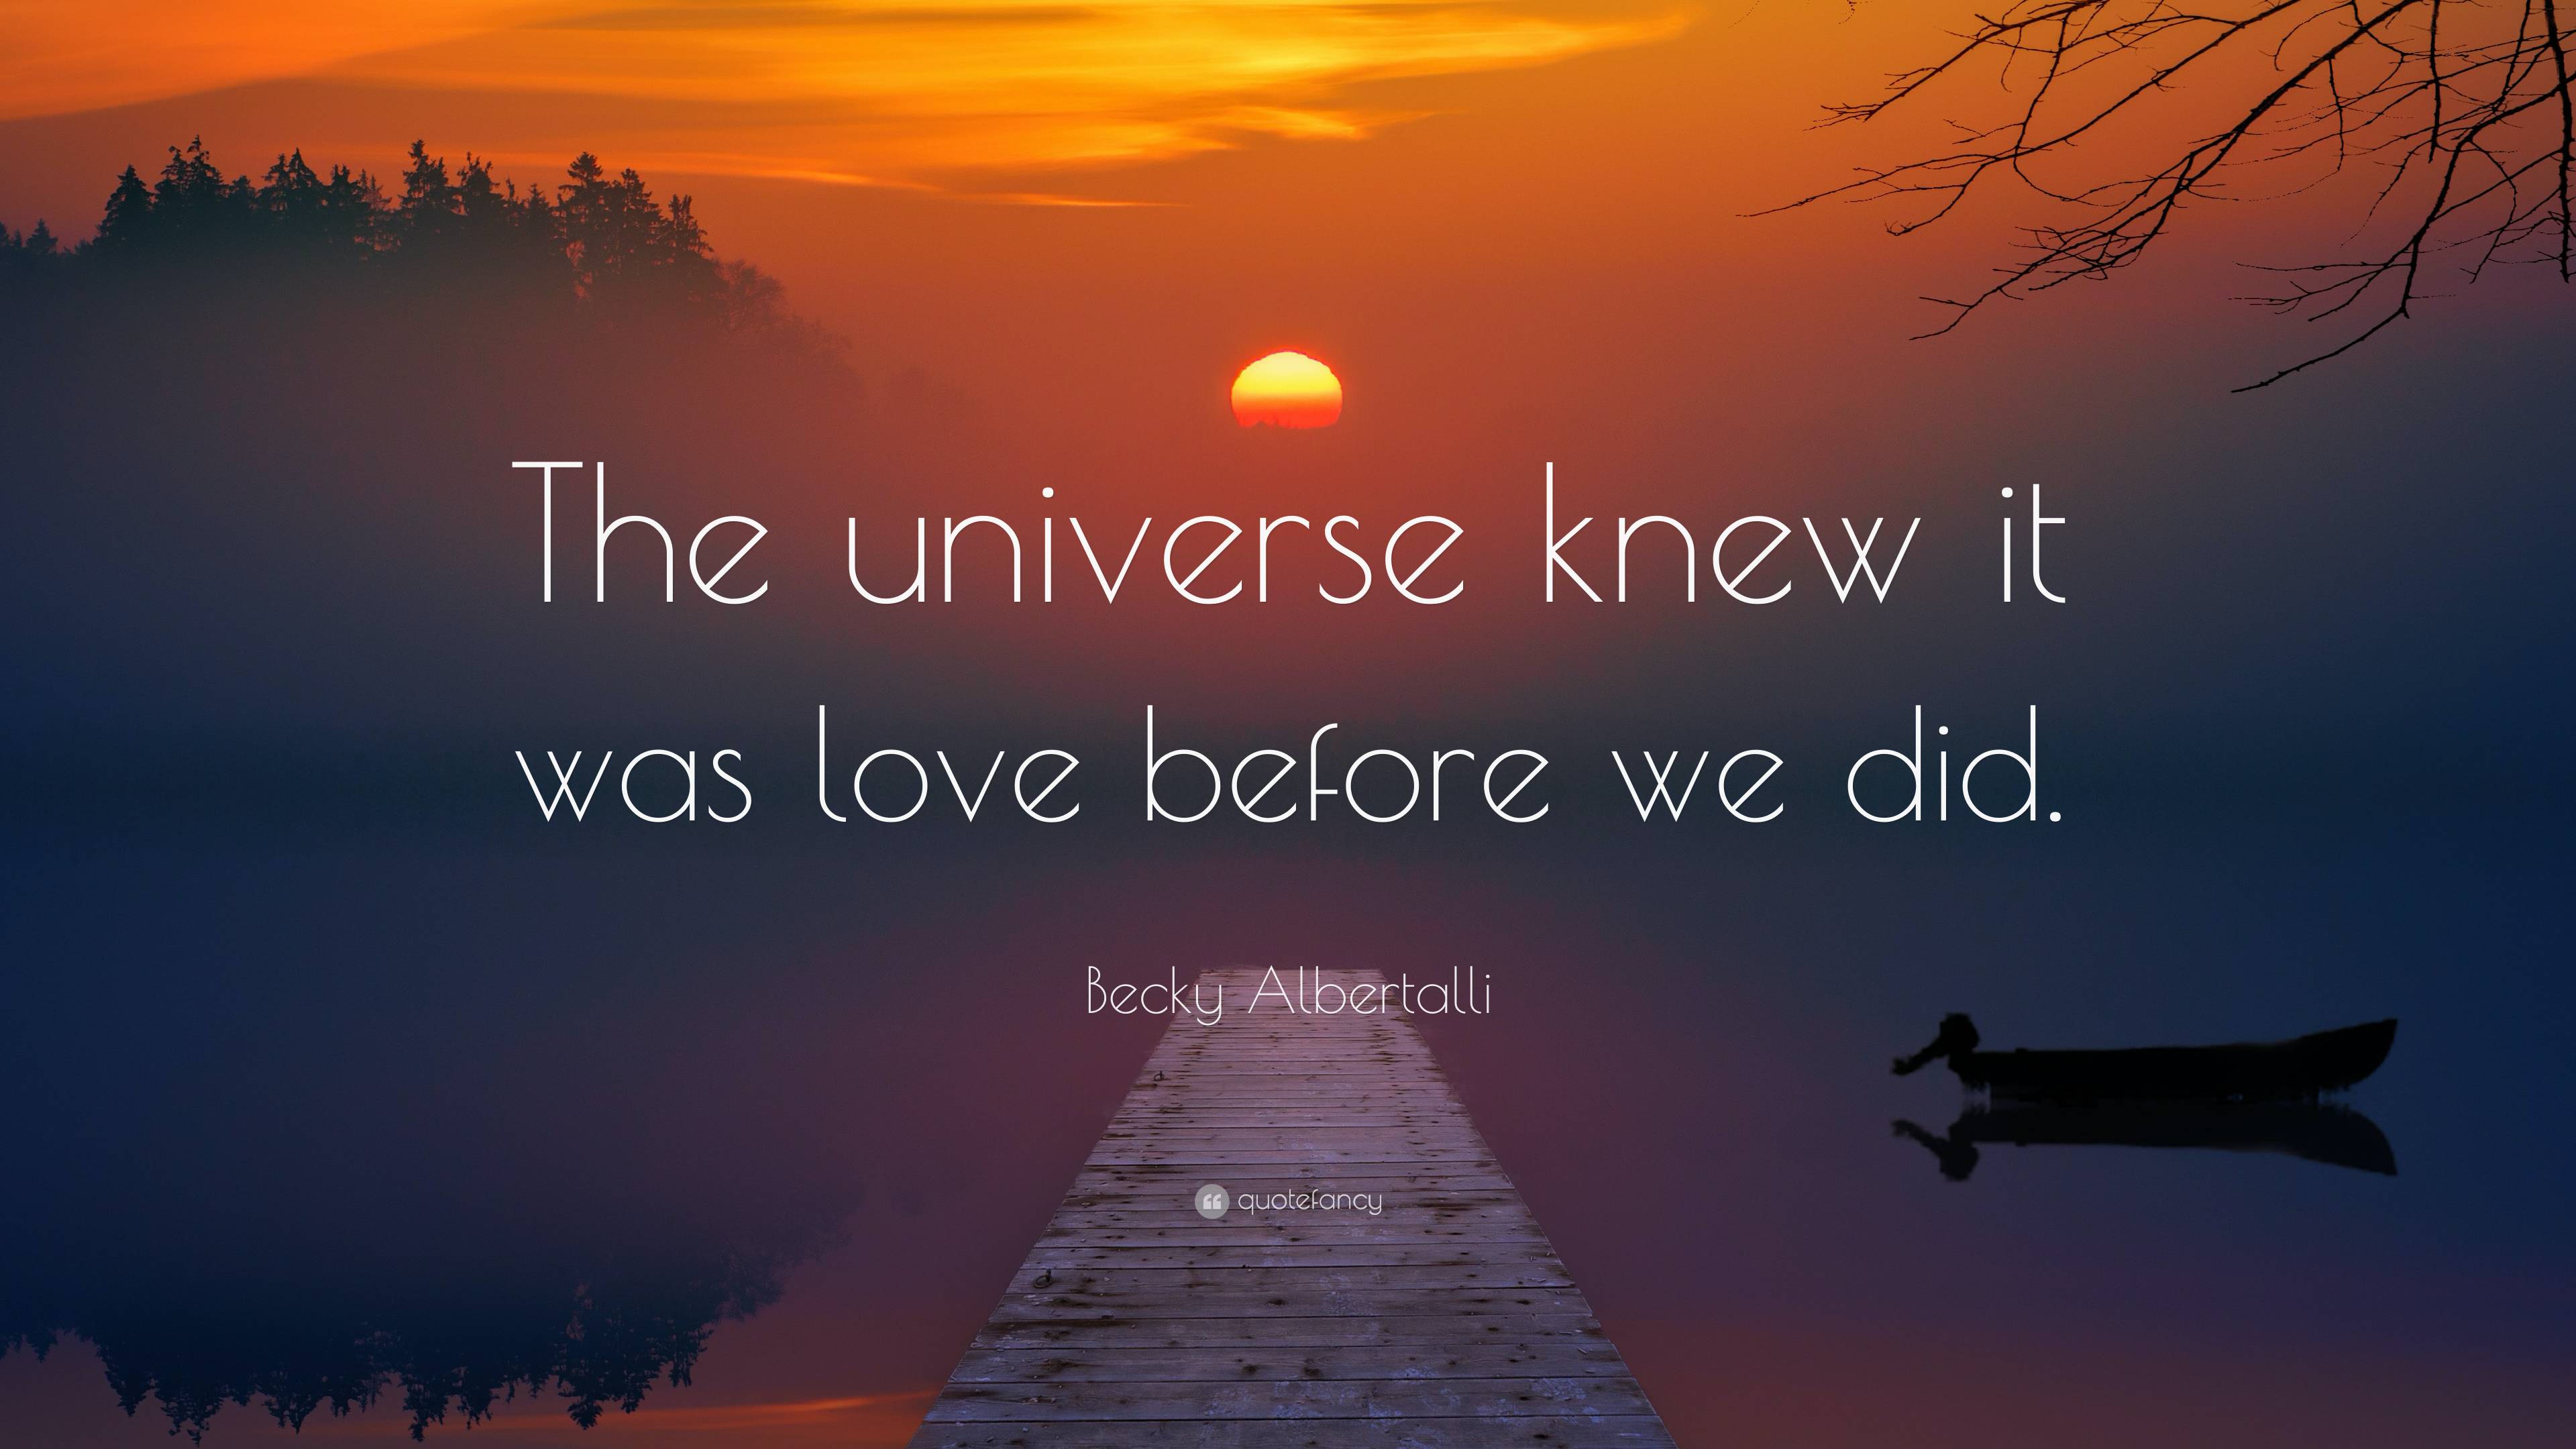 Becky Albertalli Quote: “The universe knew it was love before we did.”